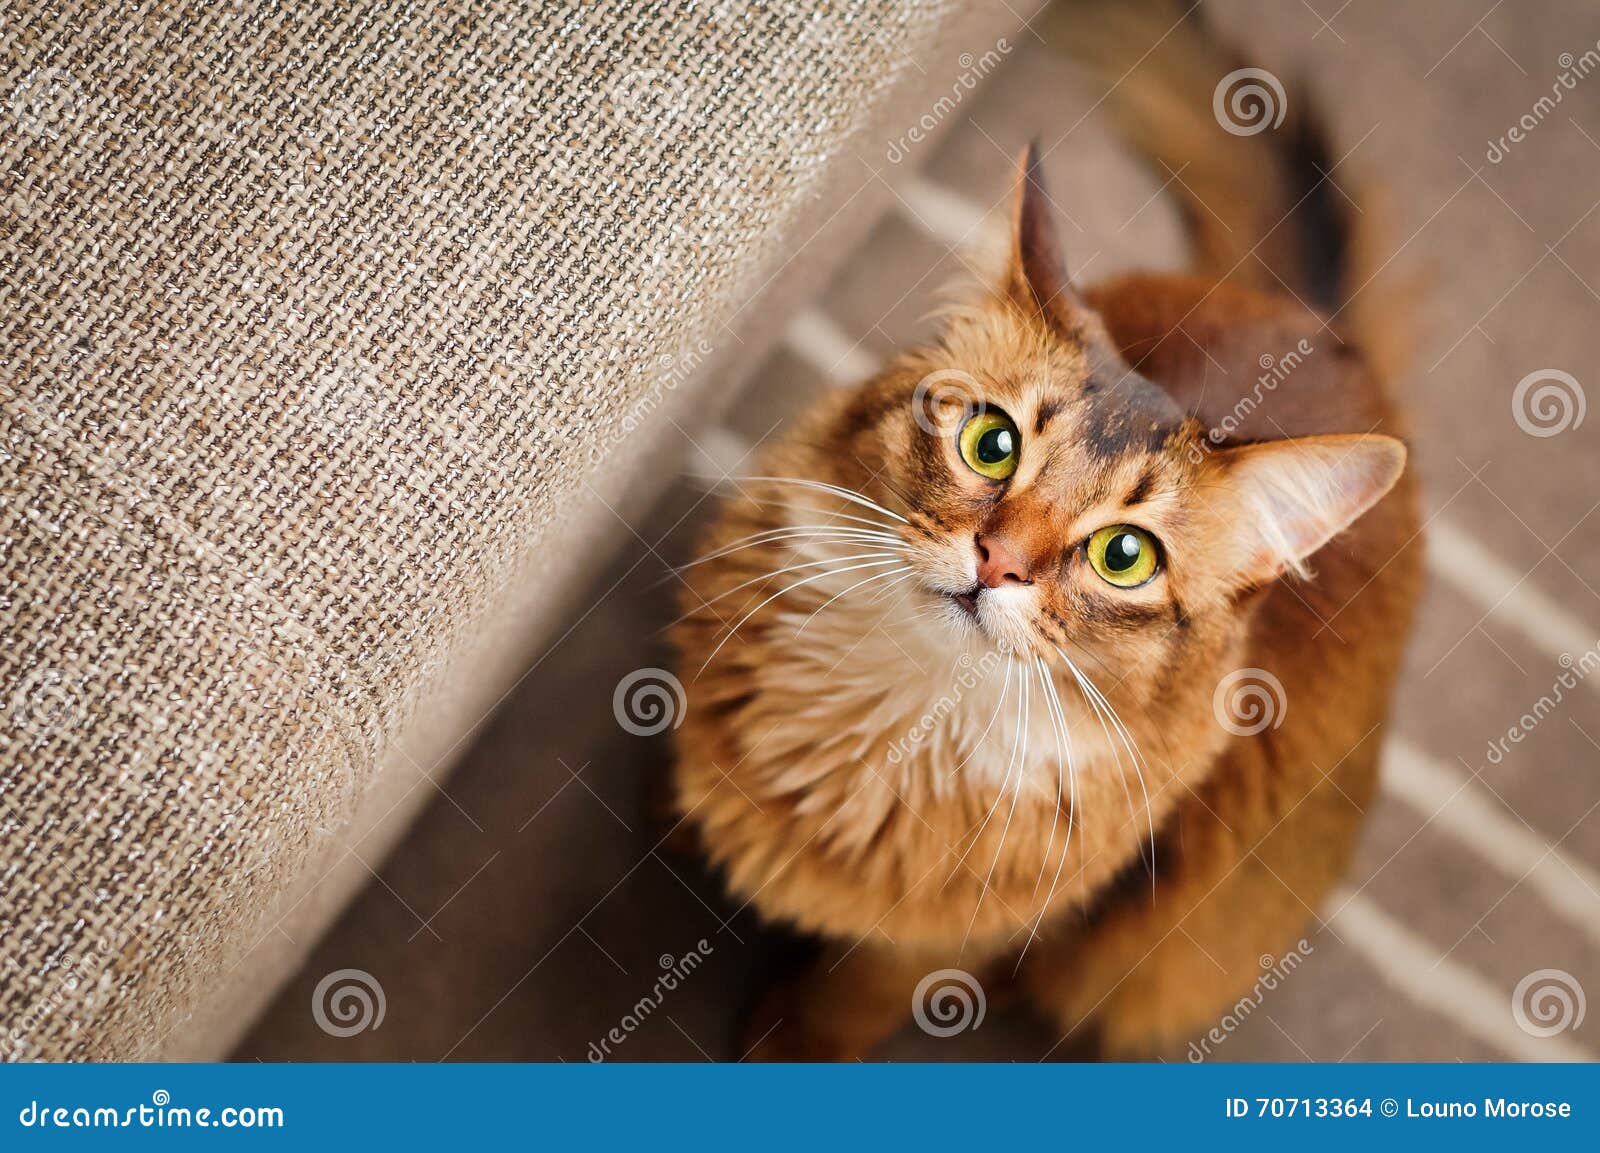 Somali Cat Looking Up stock photo. Image of copyspace 70713364